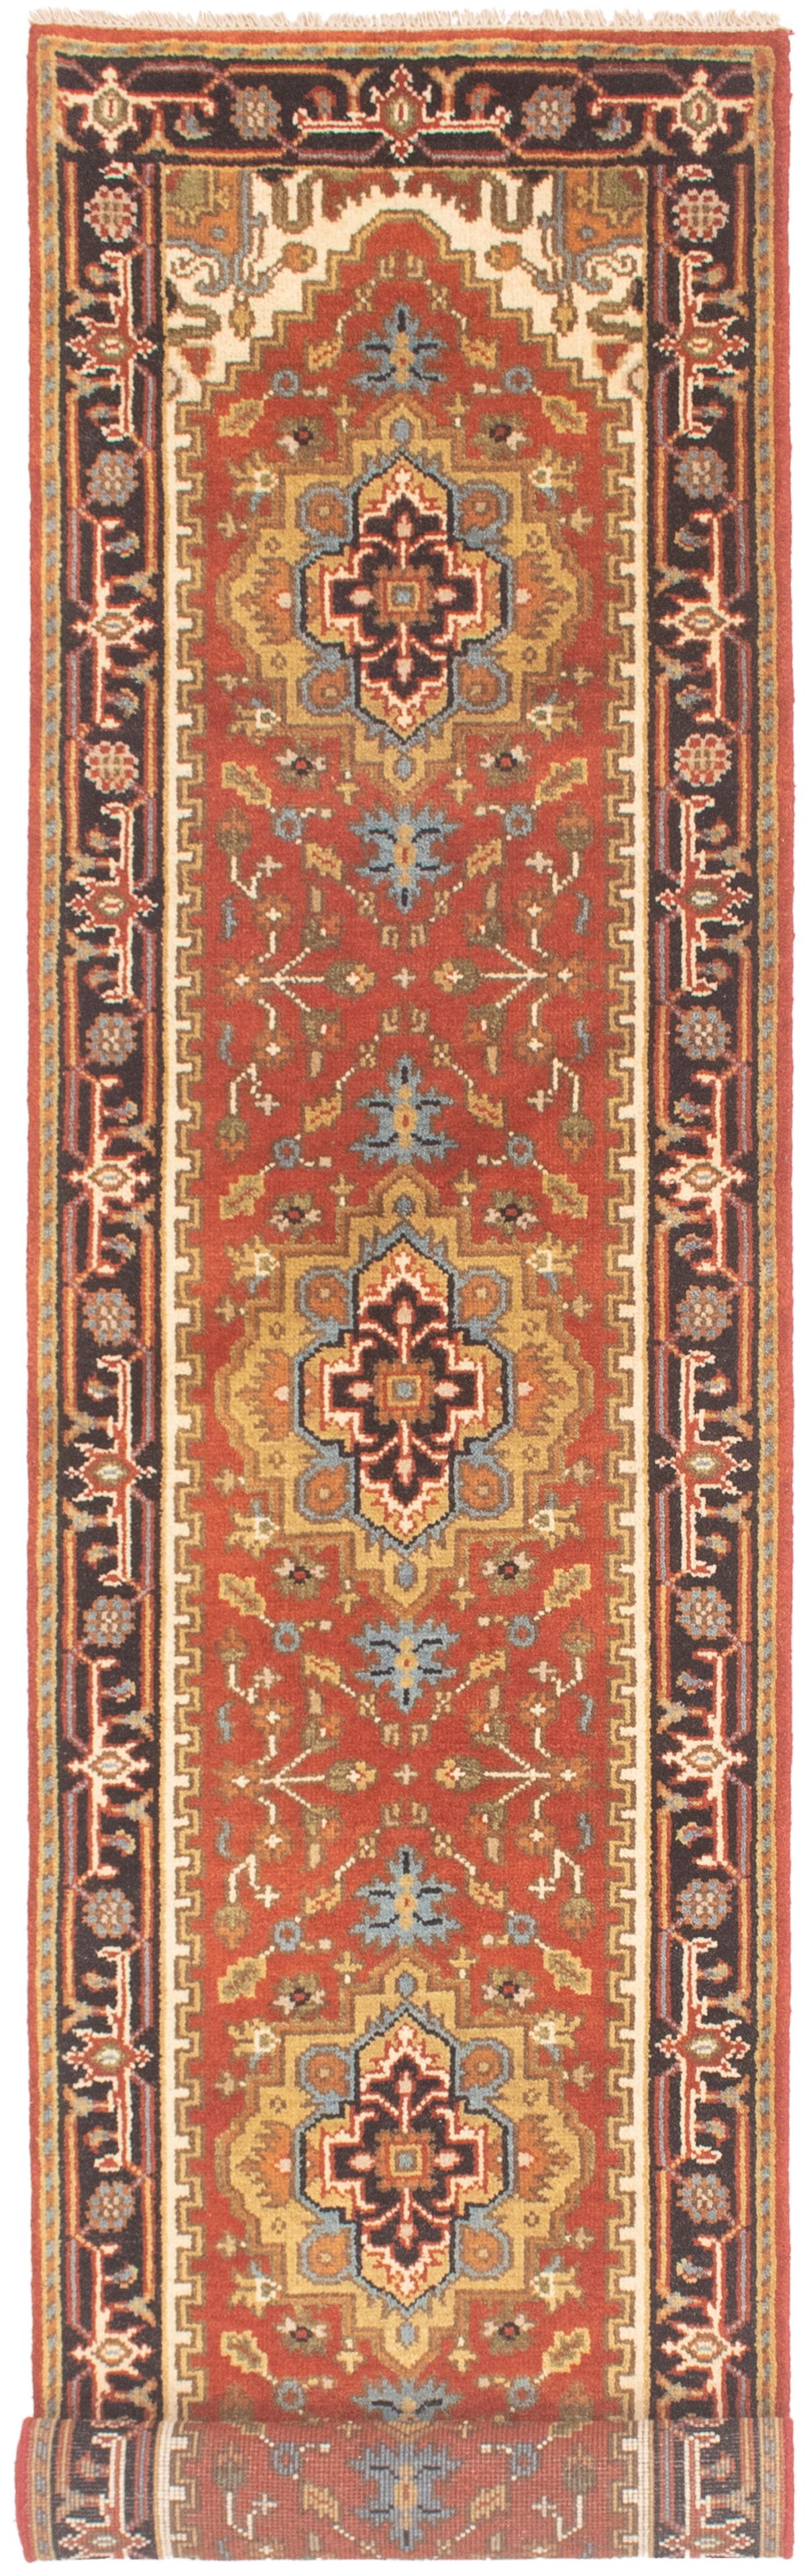 Hand-knotted Serapi Heritage Red Wool Rug 2'6" x 11'11"  Size: 2'6" x 11'11"  